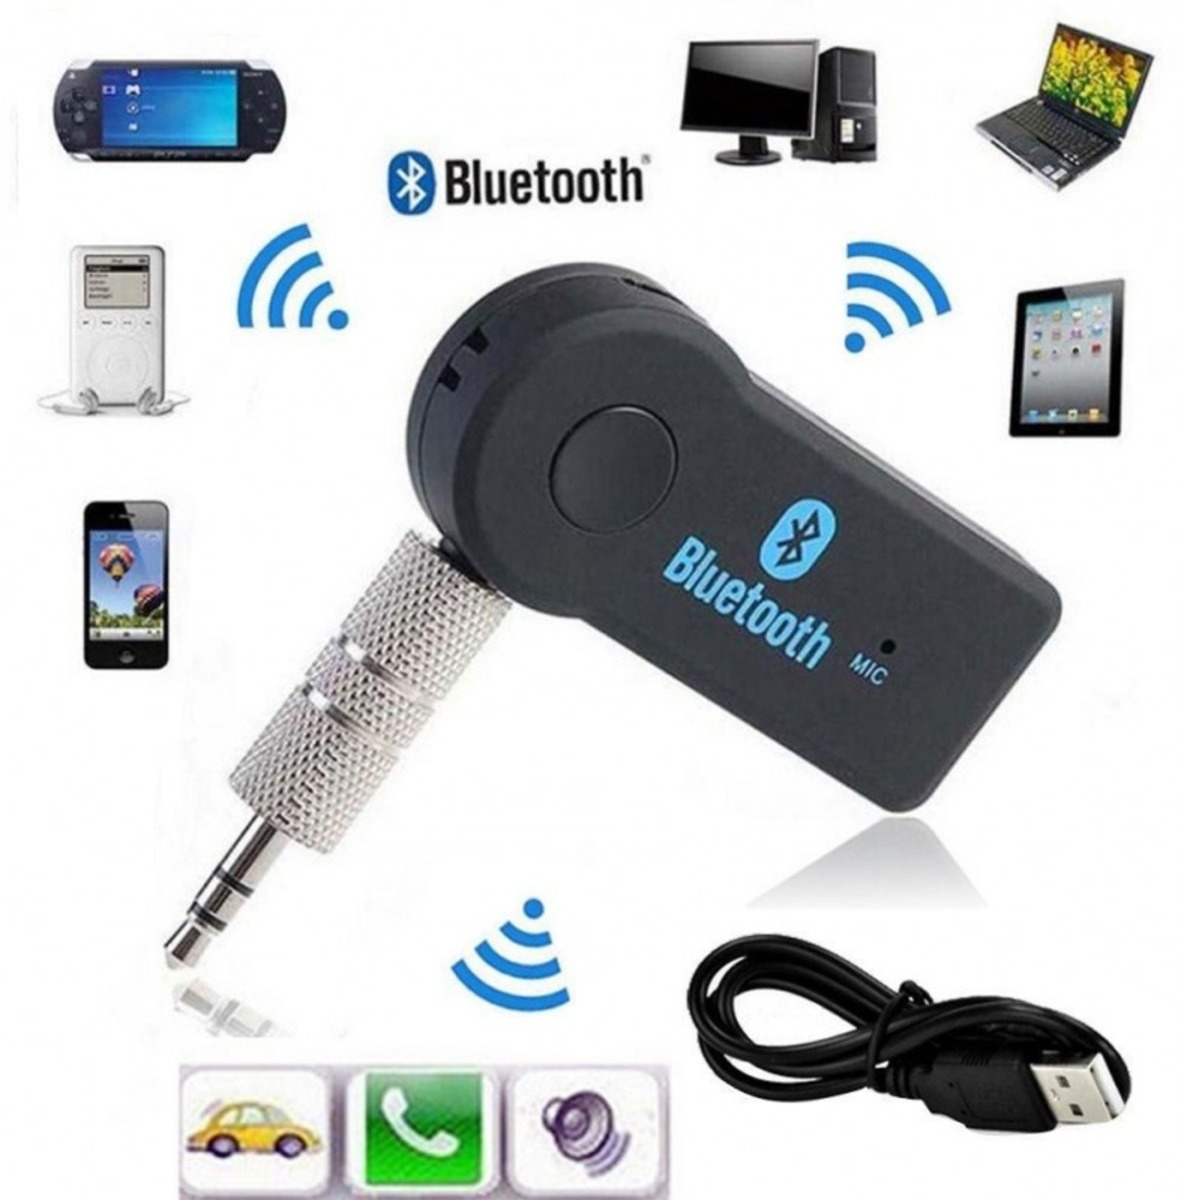 Iends 3.5mm Audio Bluetooth Auxiliary Adapter for Speakers, Car Stereo,  Sound Systems With Mic BT437 Online at Best Price, Mobile Hands Free